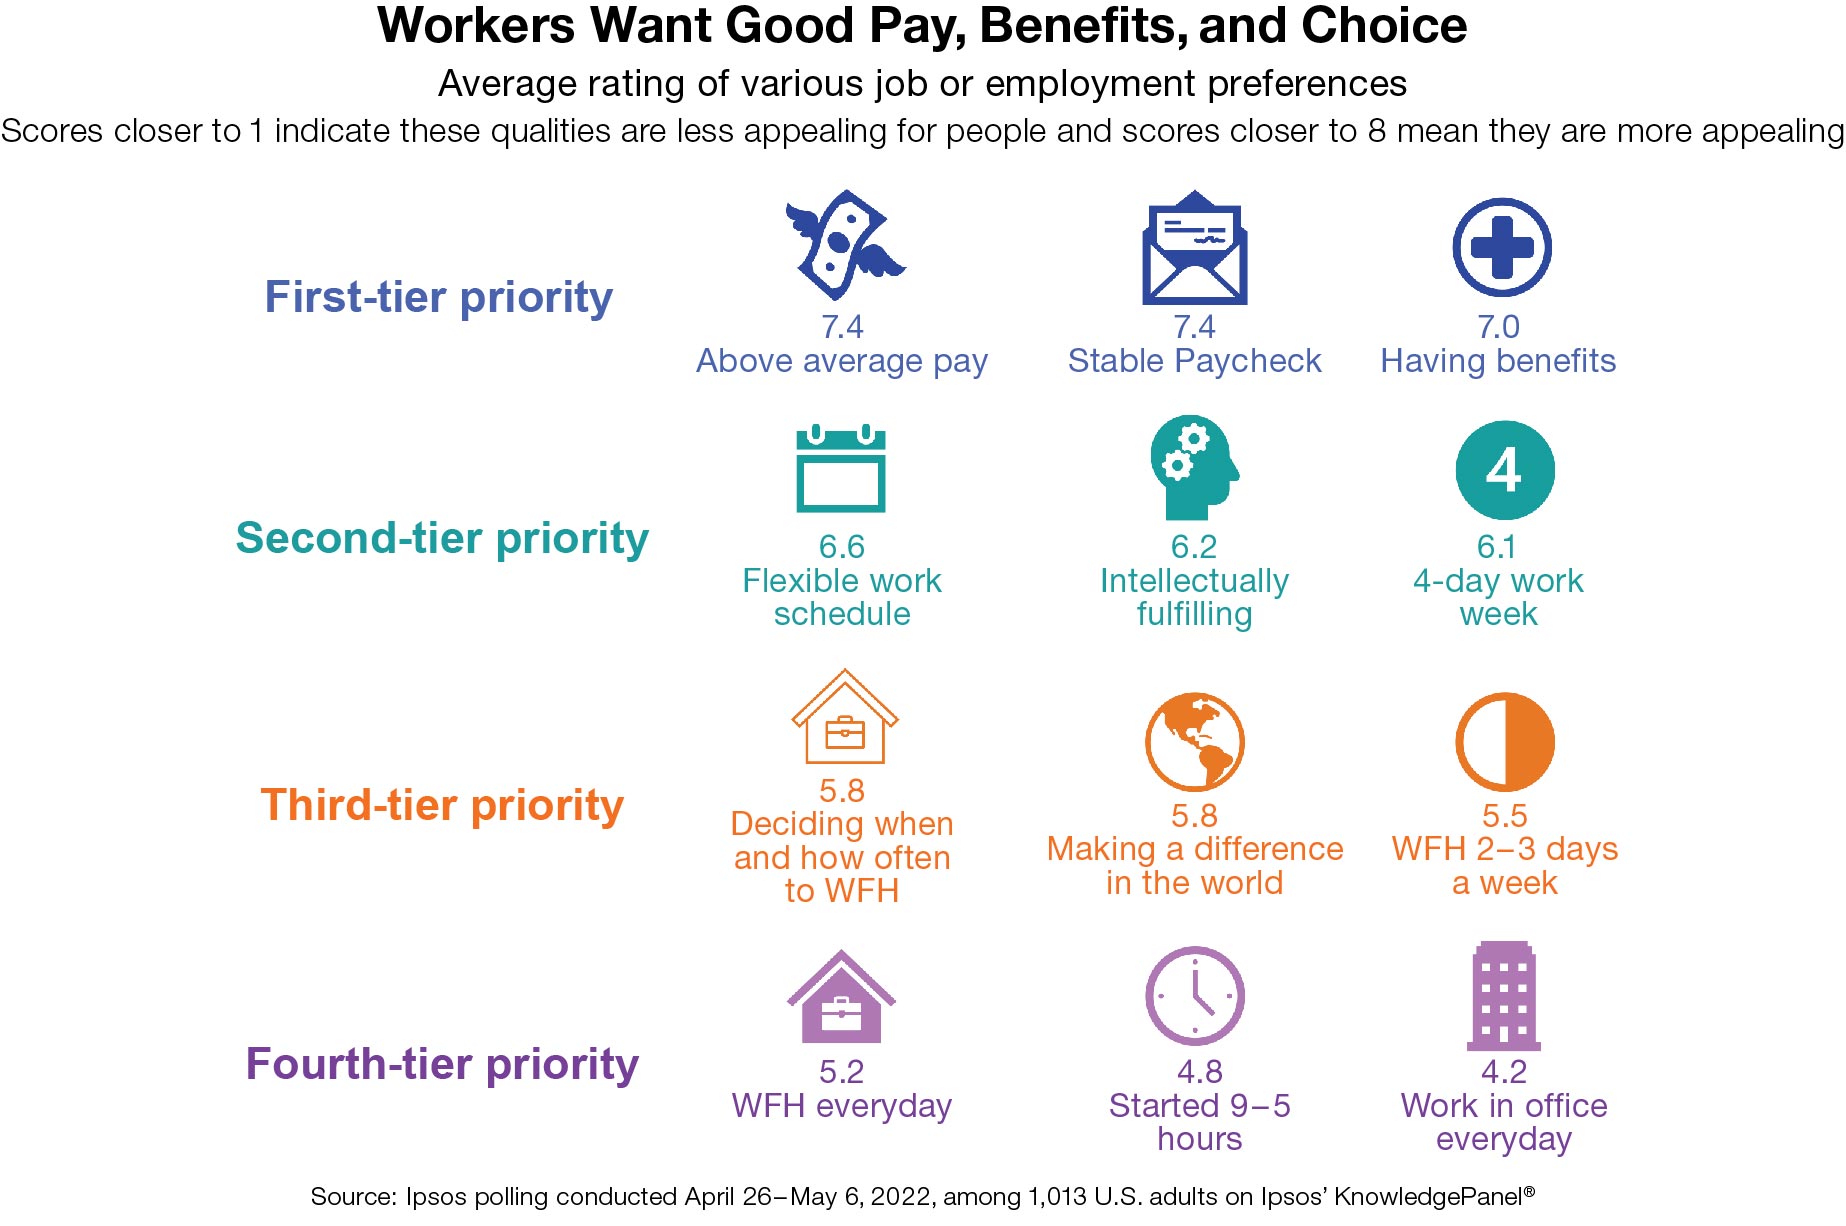 Workers want good pay, benefits, and choice